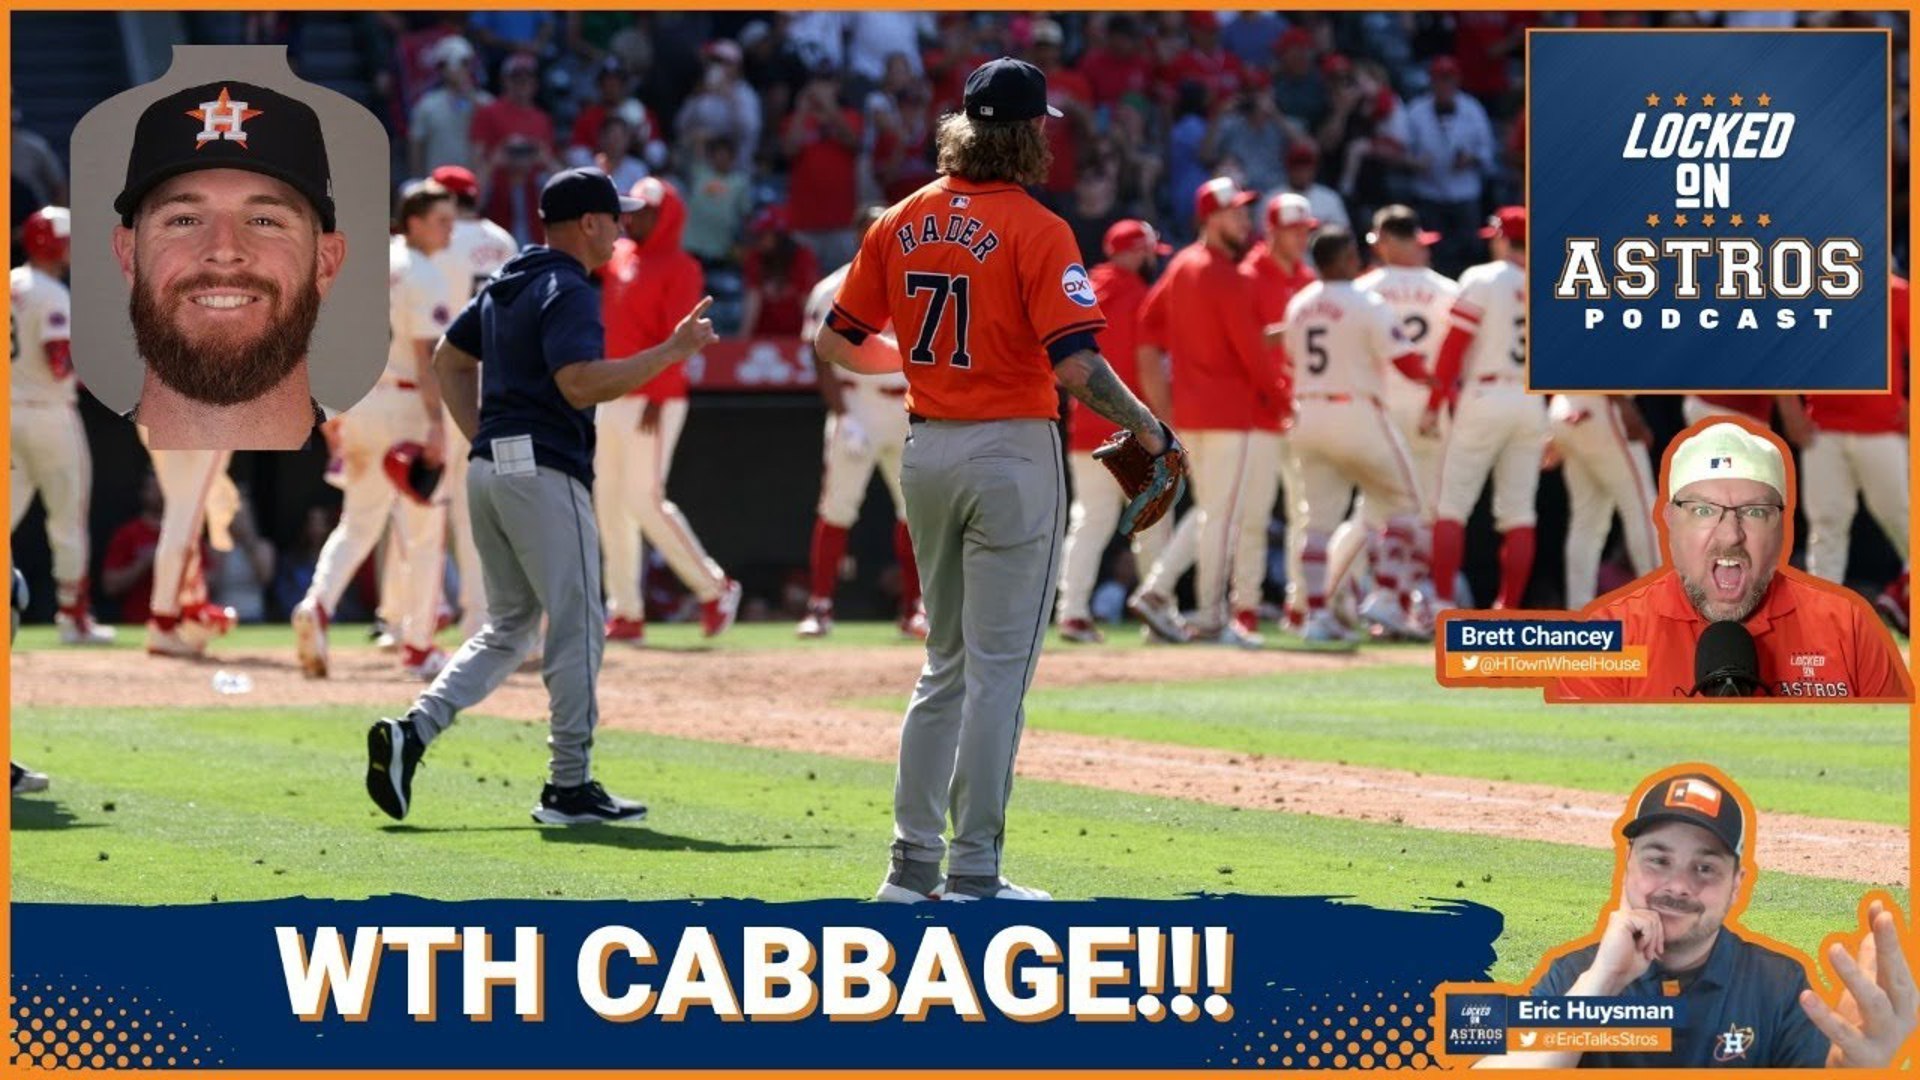 Astros drop game 3 with a spoiled Cabbage catch